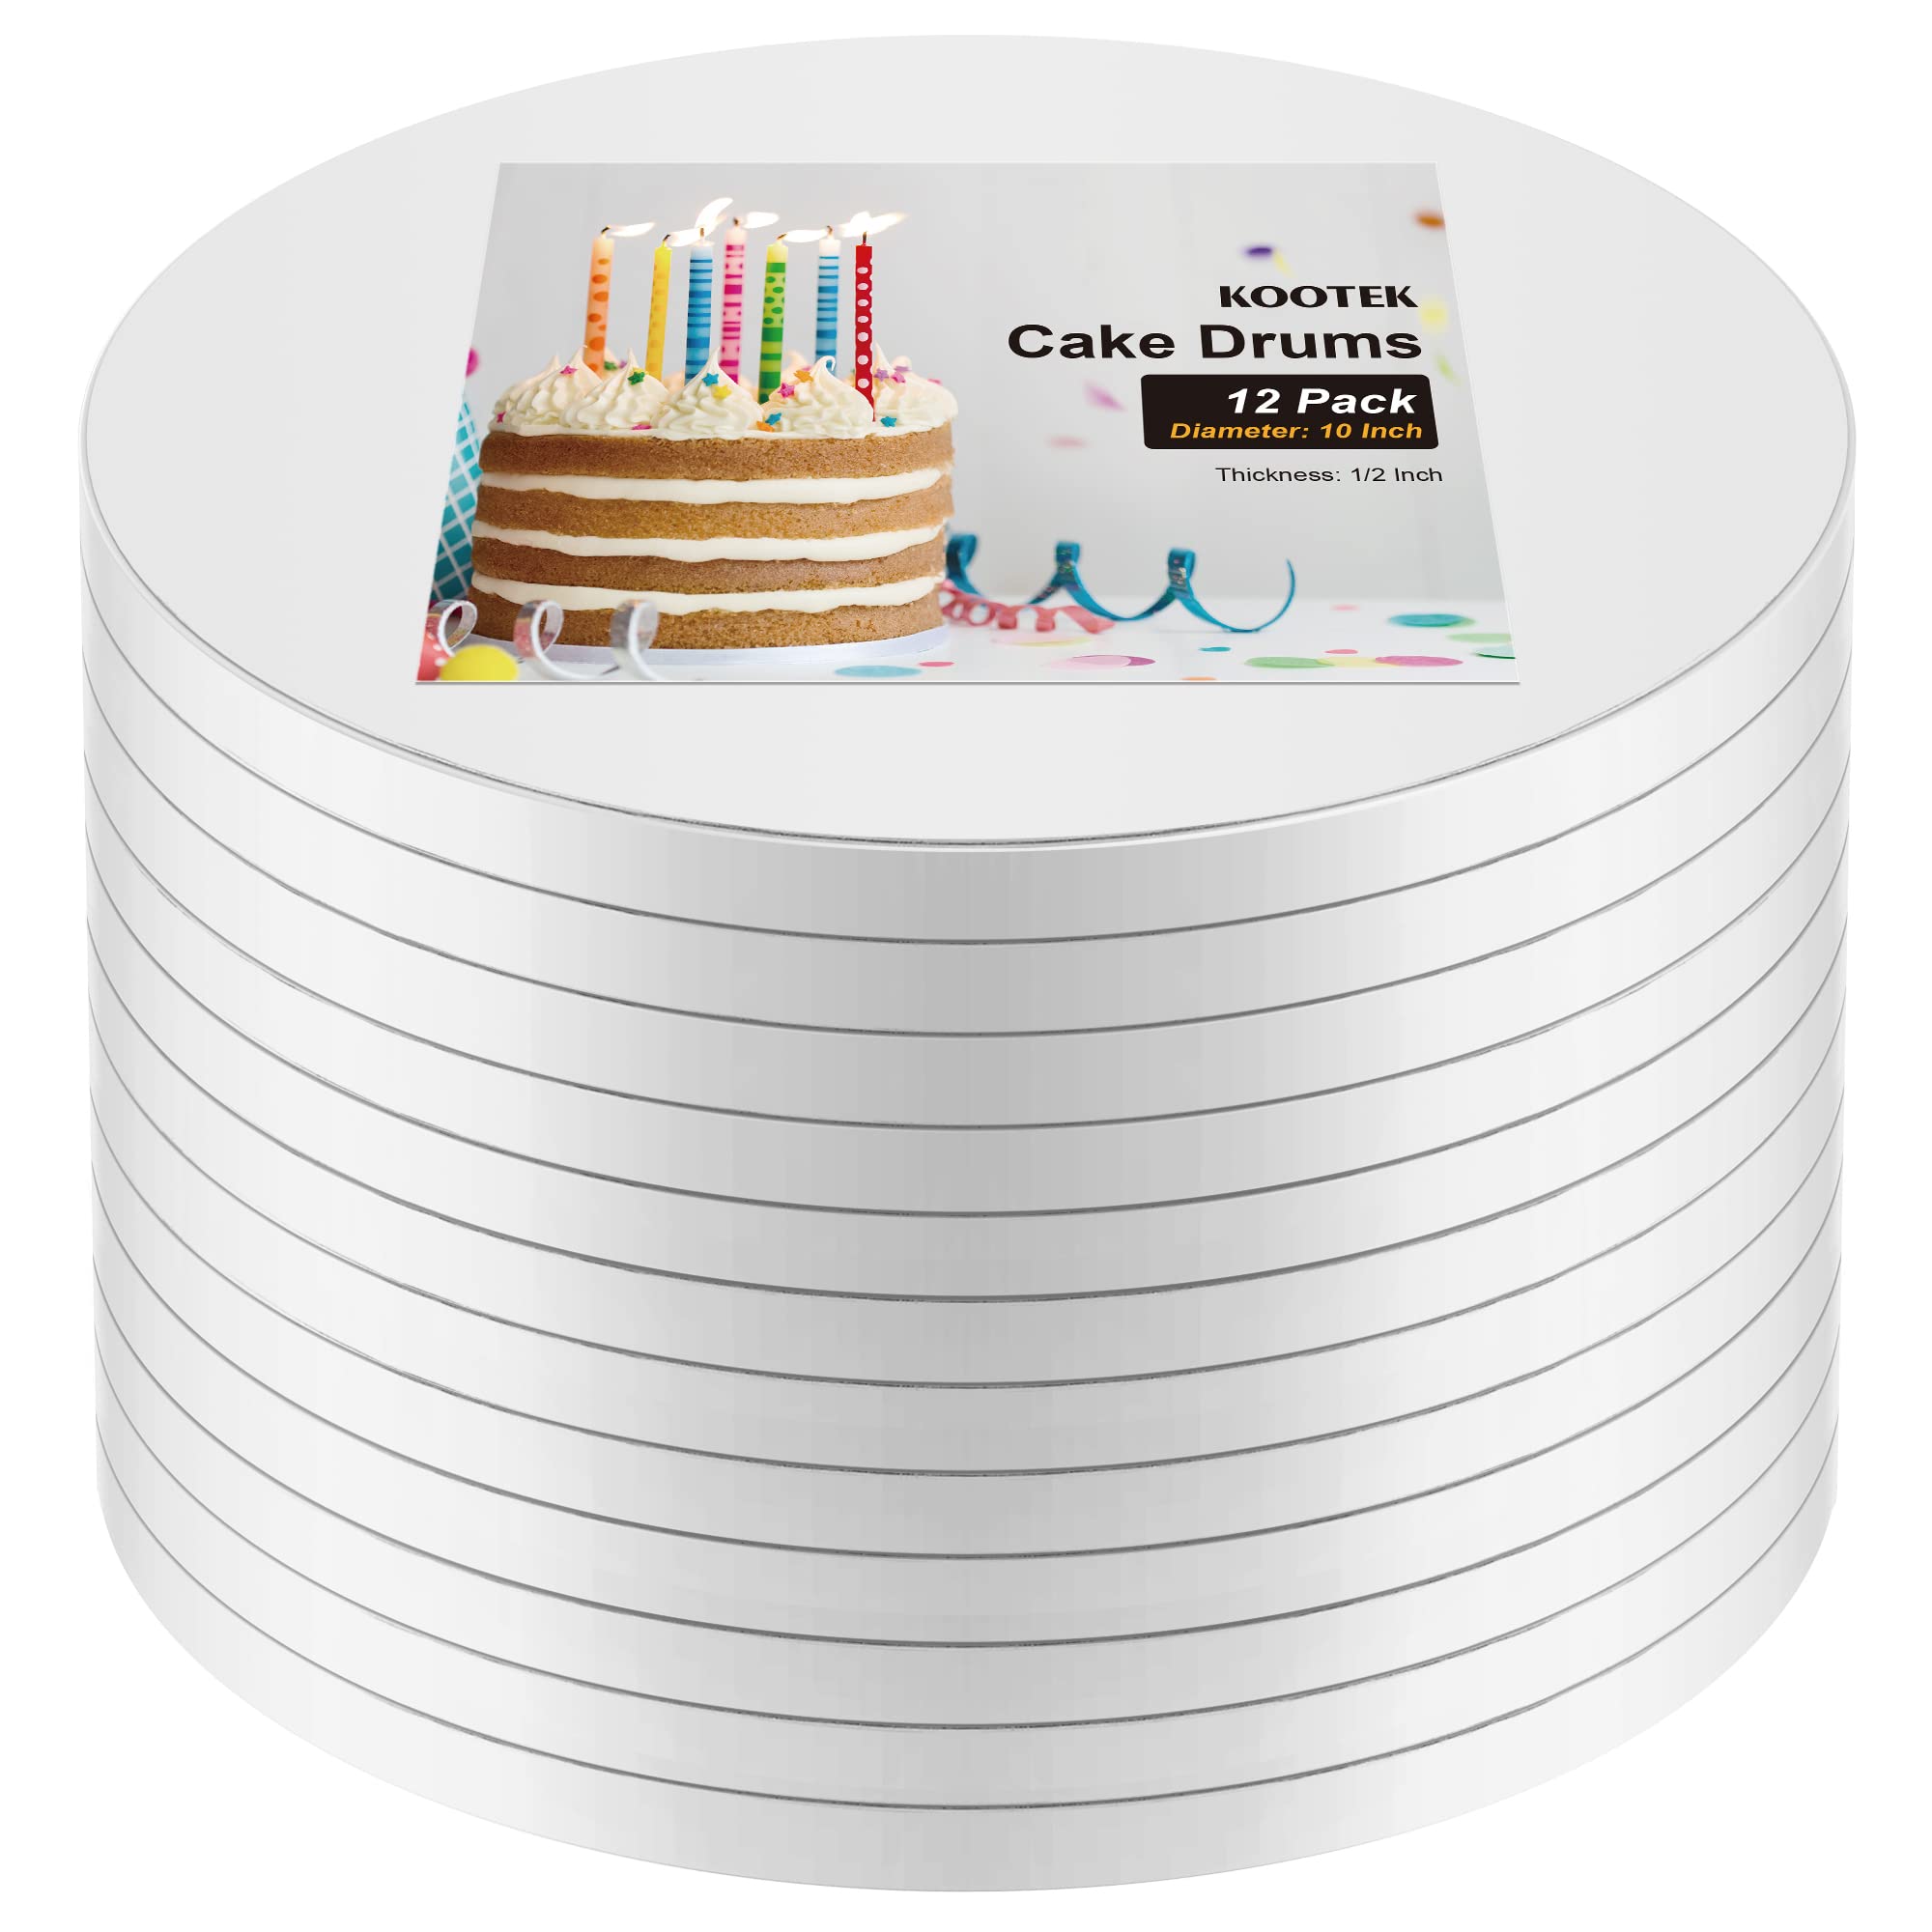 Kootek Cake Boards Drum 10 Inch Round, 1/2" Thick Cake Drums, Cake Decorating Supplies White 12 Pack Sturdy Cake Corrugated Cardboard for Multi-Layer Cakes